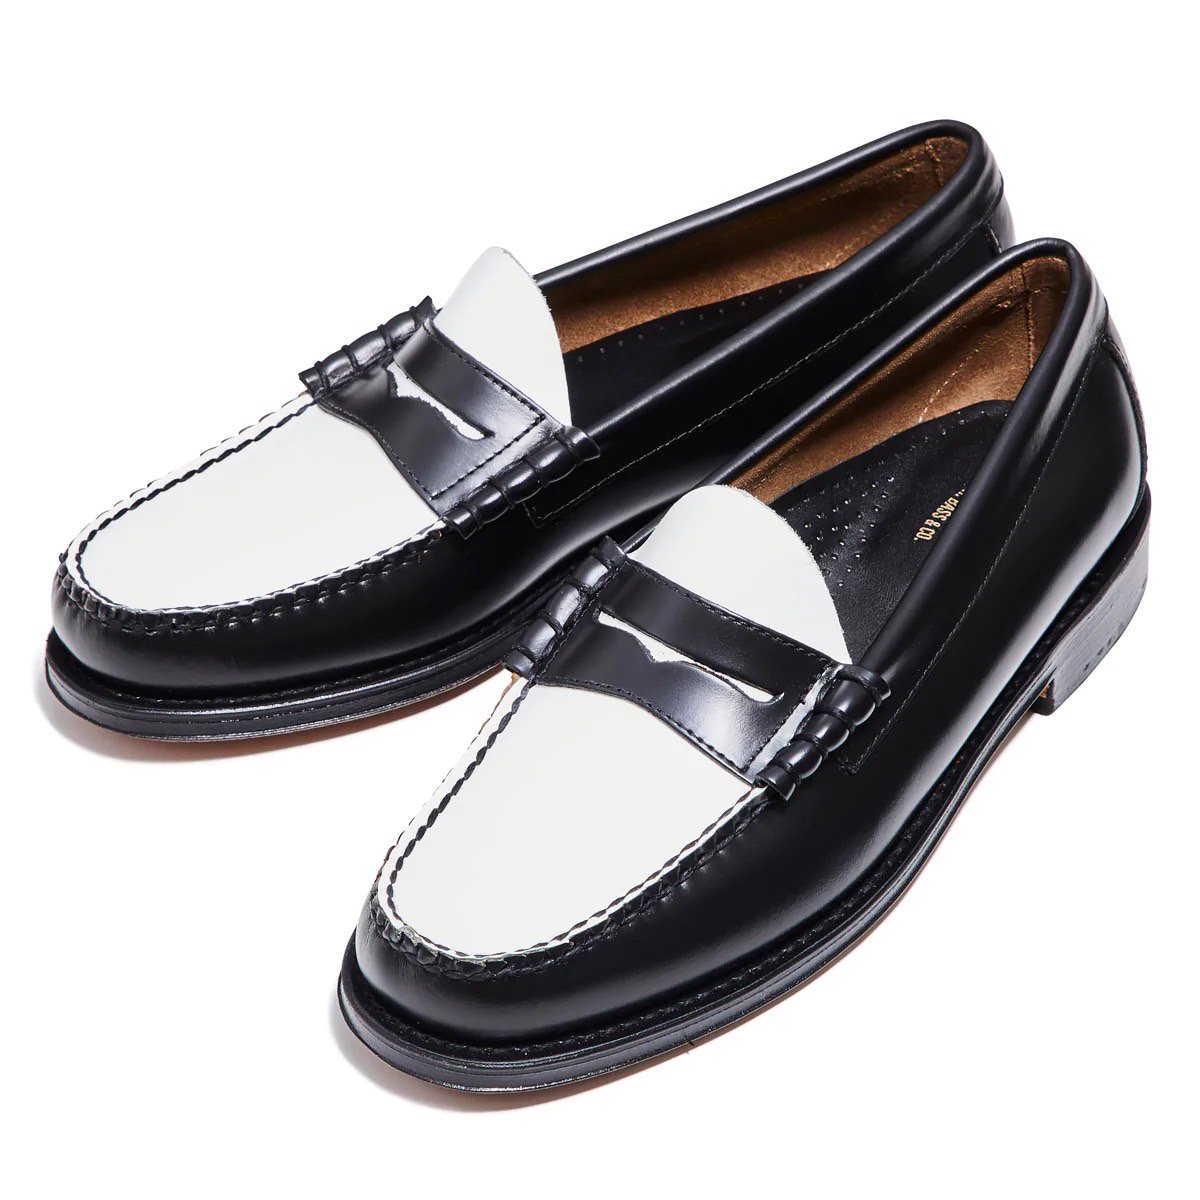 35%OFF G.H.BASS (ジーエイチバス)｜11010H WEEJUN HERITAGE LARSON MOC PENNY BLACK & WHITE LEATHER SOLE